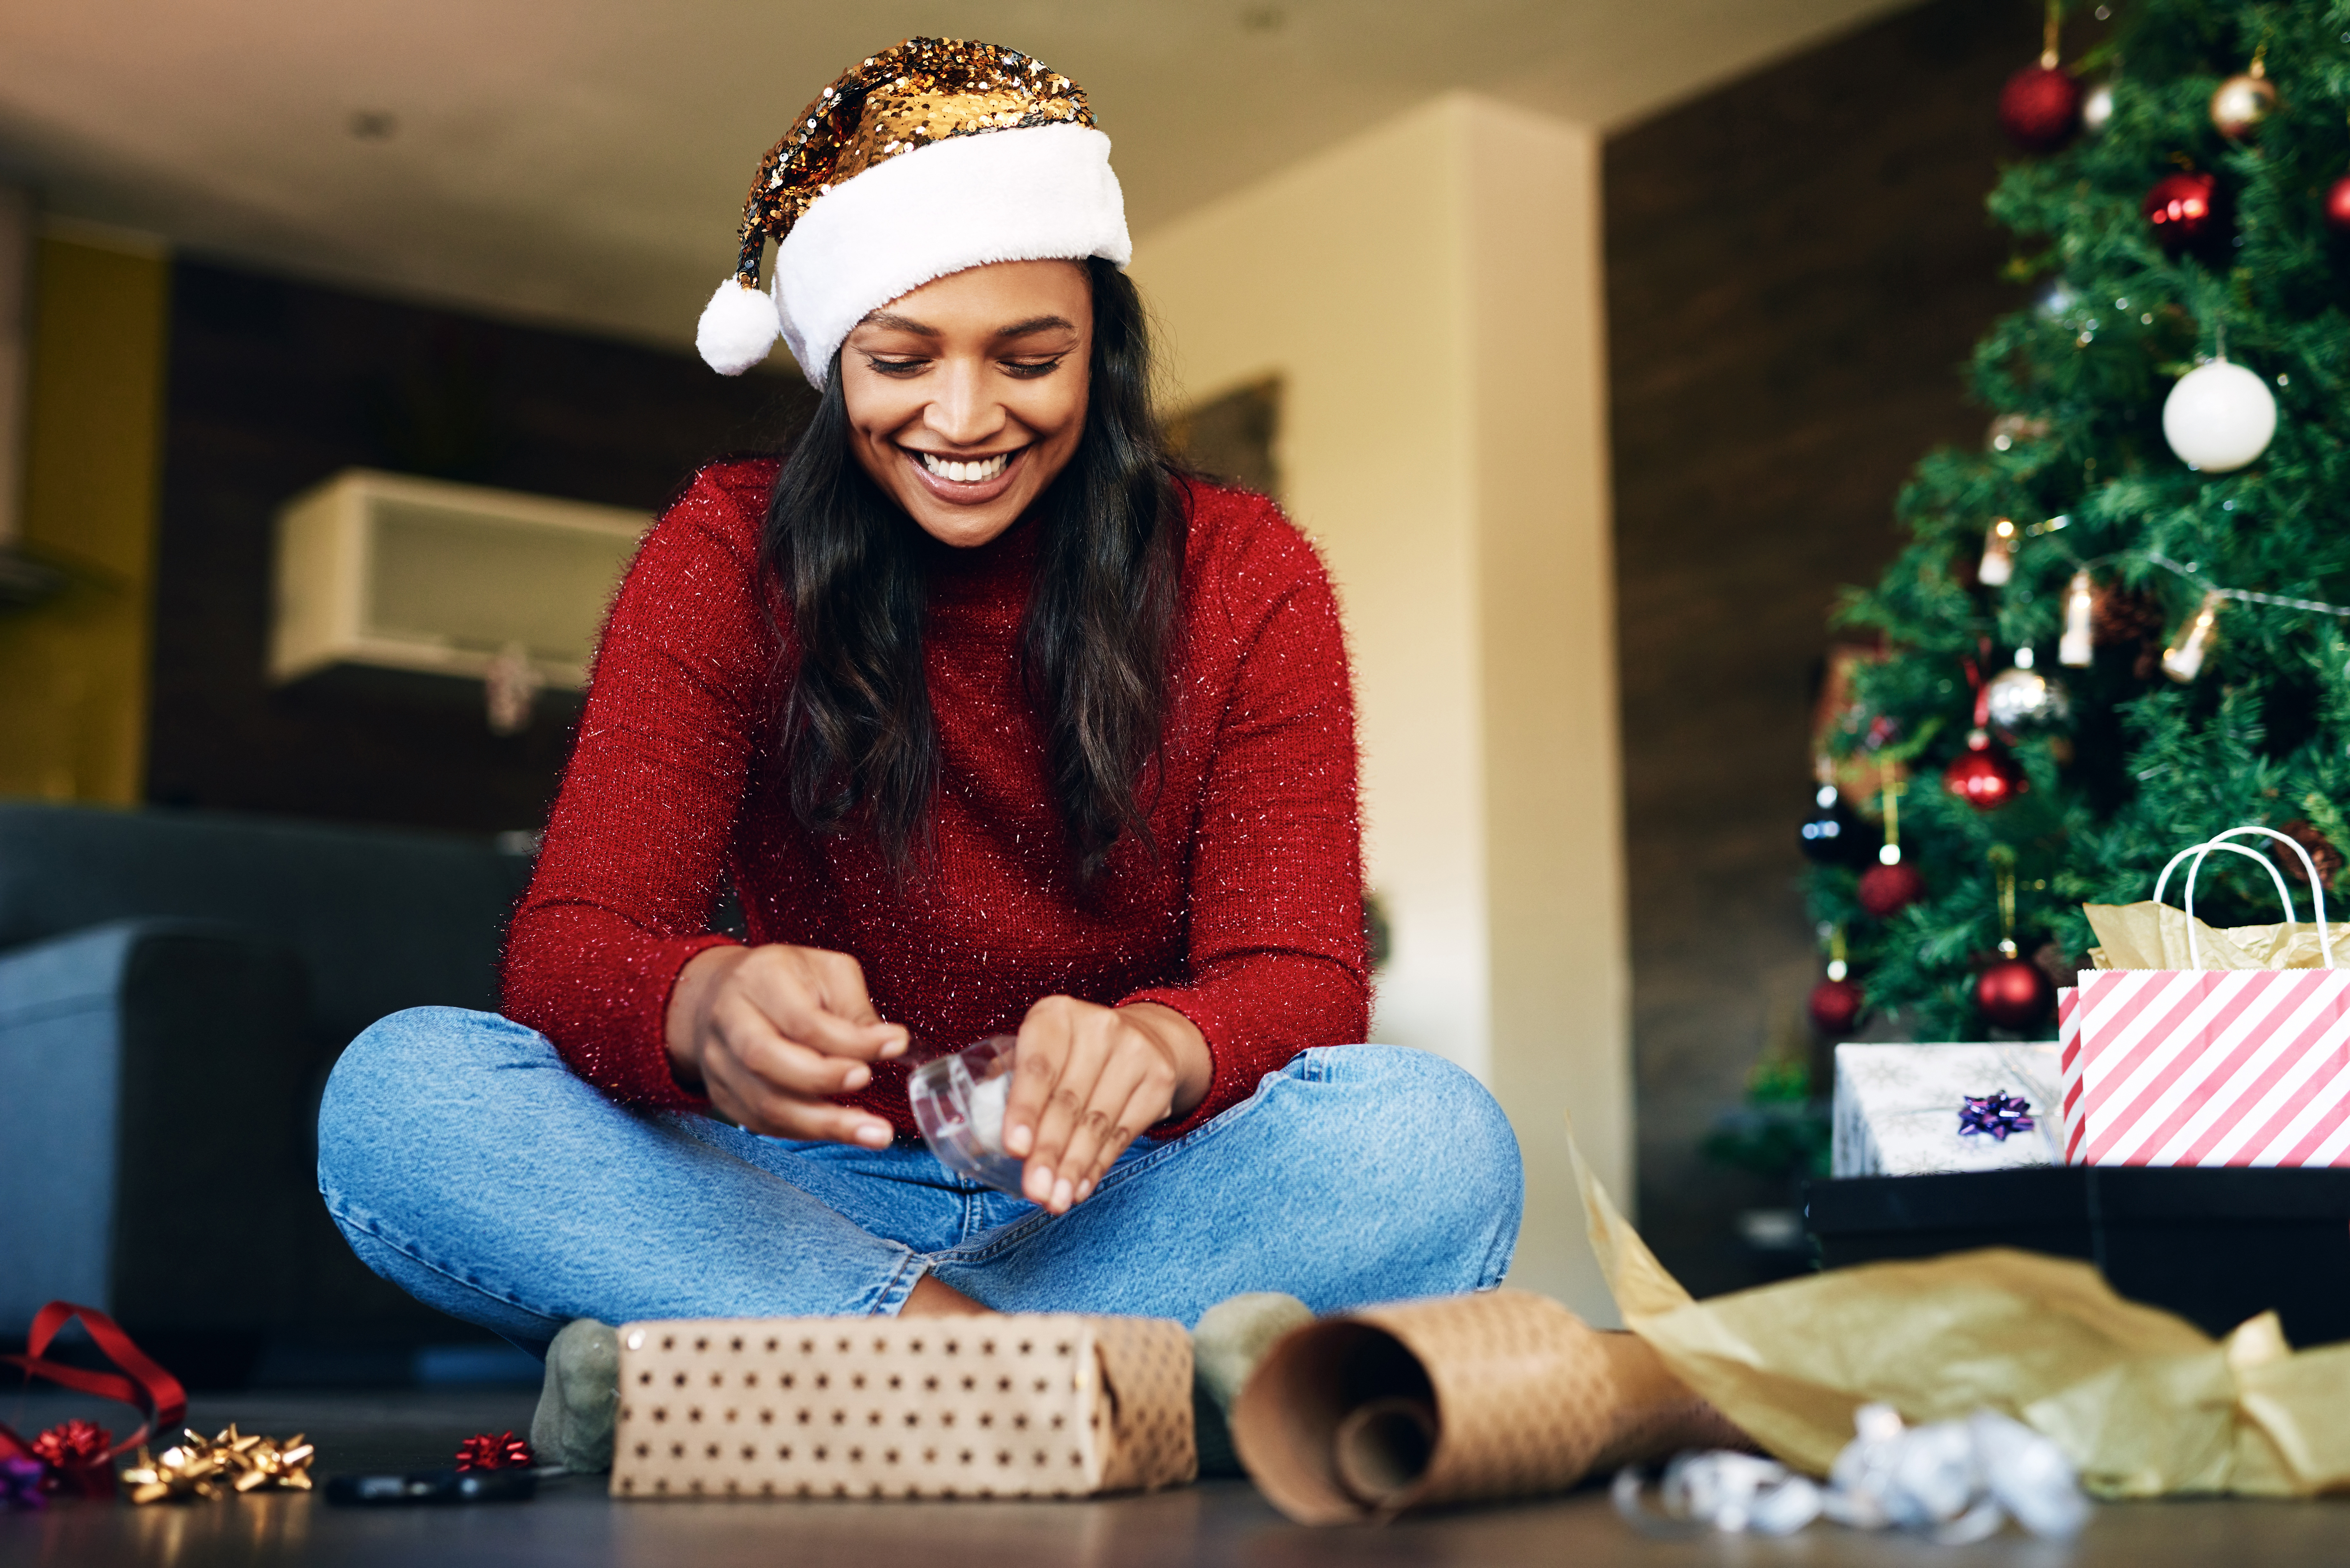 Black woman in a sparkly gold santa claus hat sitting on the floor wrapping presents with a smile on her face.